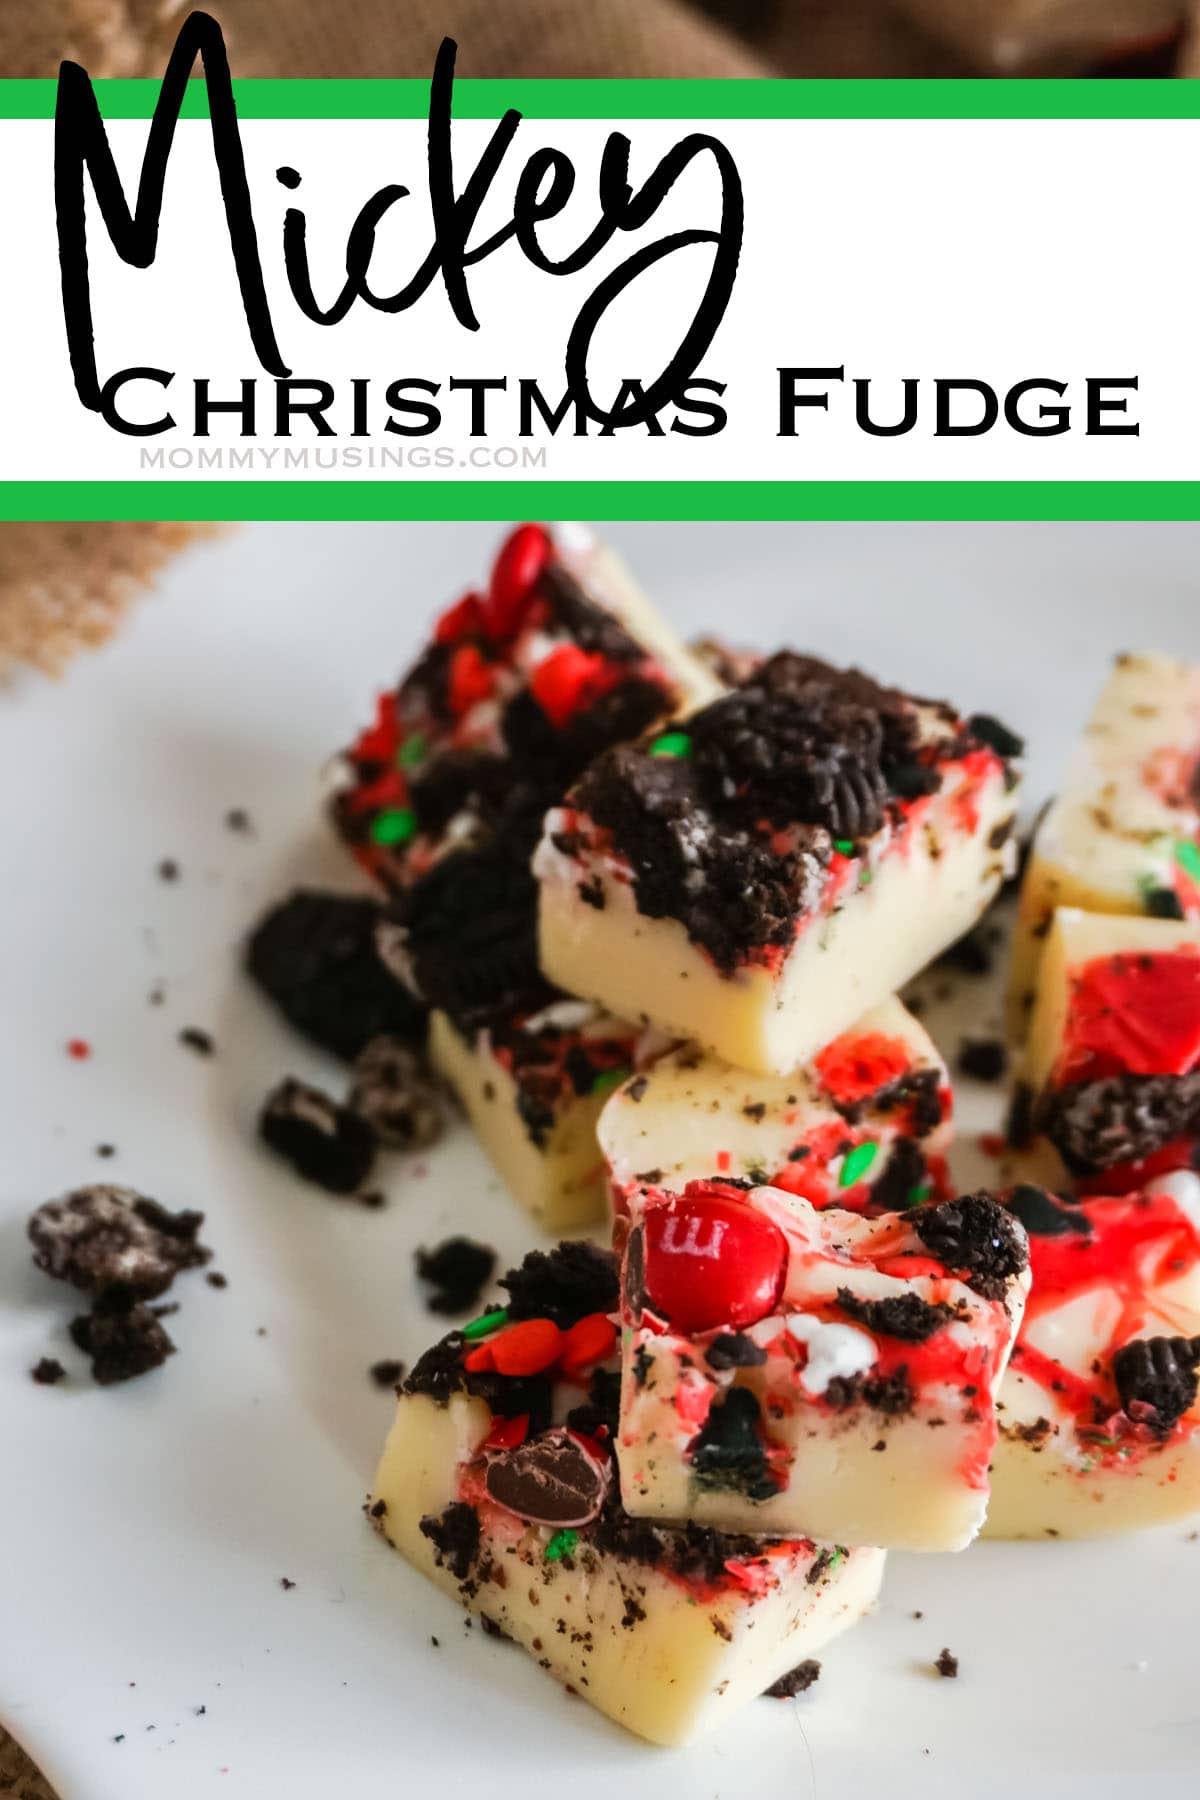 holiday fudge recipe with text which reads mickey christmas fudge